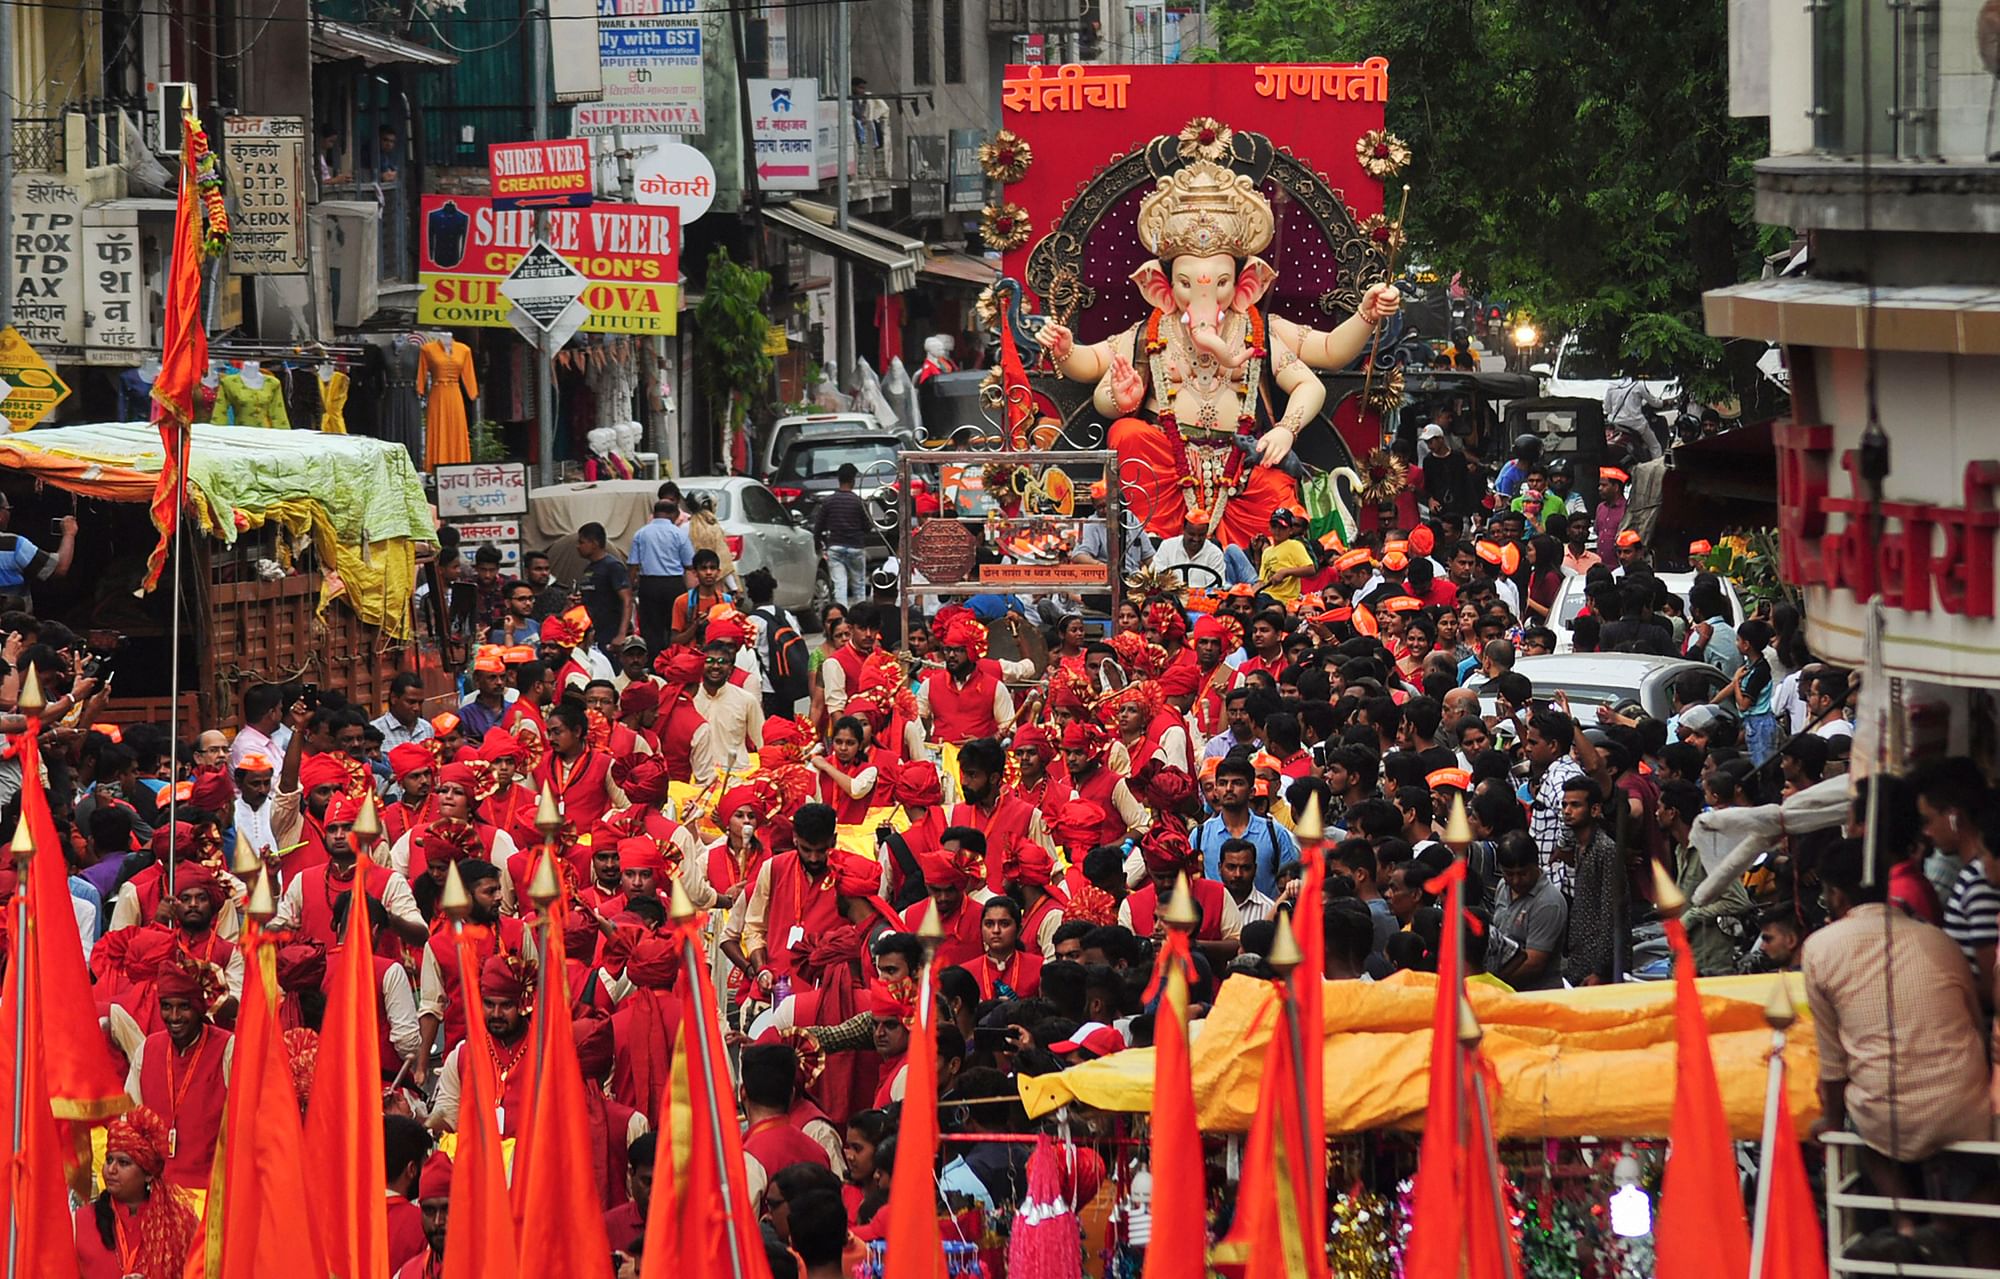 Chants of ‘Ganpati Bappa Morya’ and  offerings of ‘laddoos’ by devotees marked the start of the Ganesh festival.